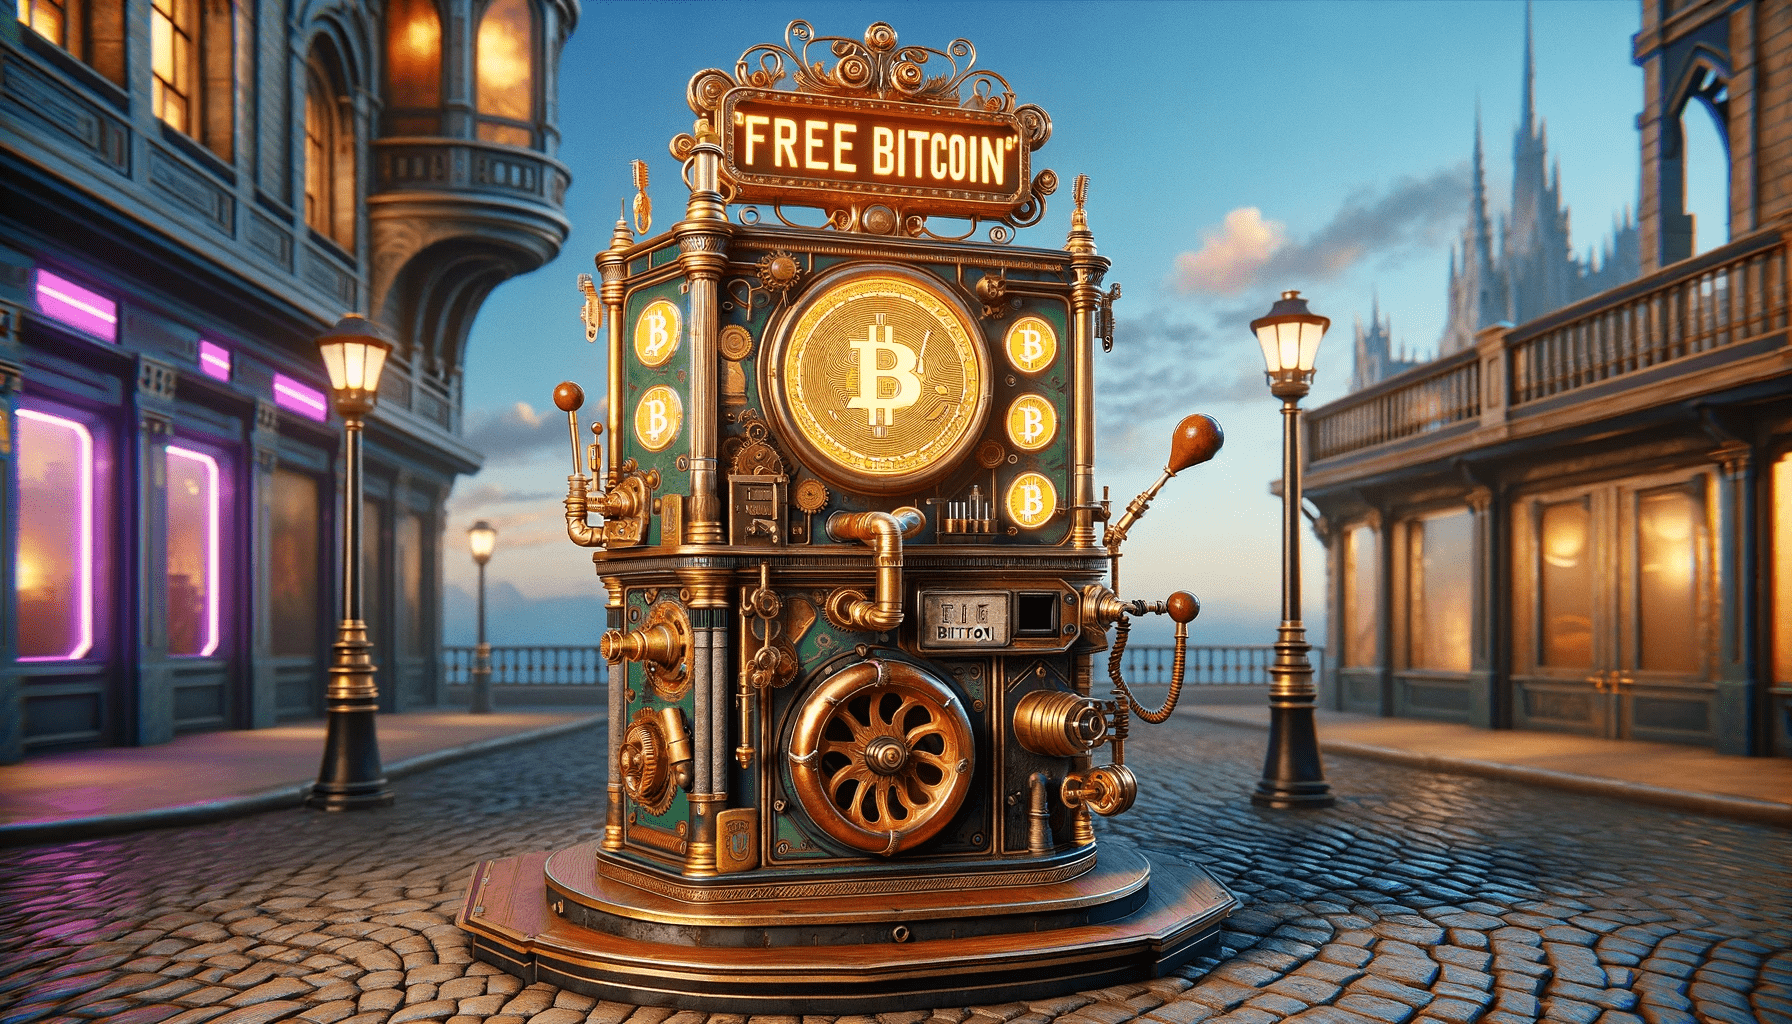 Free Bitcoin machine that allows users to earn Bitcoin easil, in the style of Bioshock Infinite.